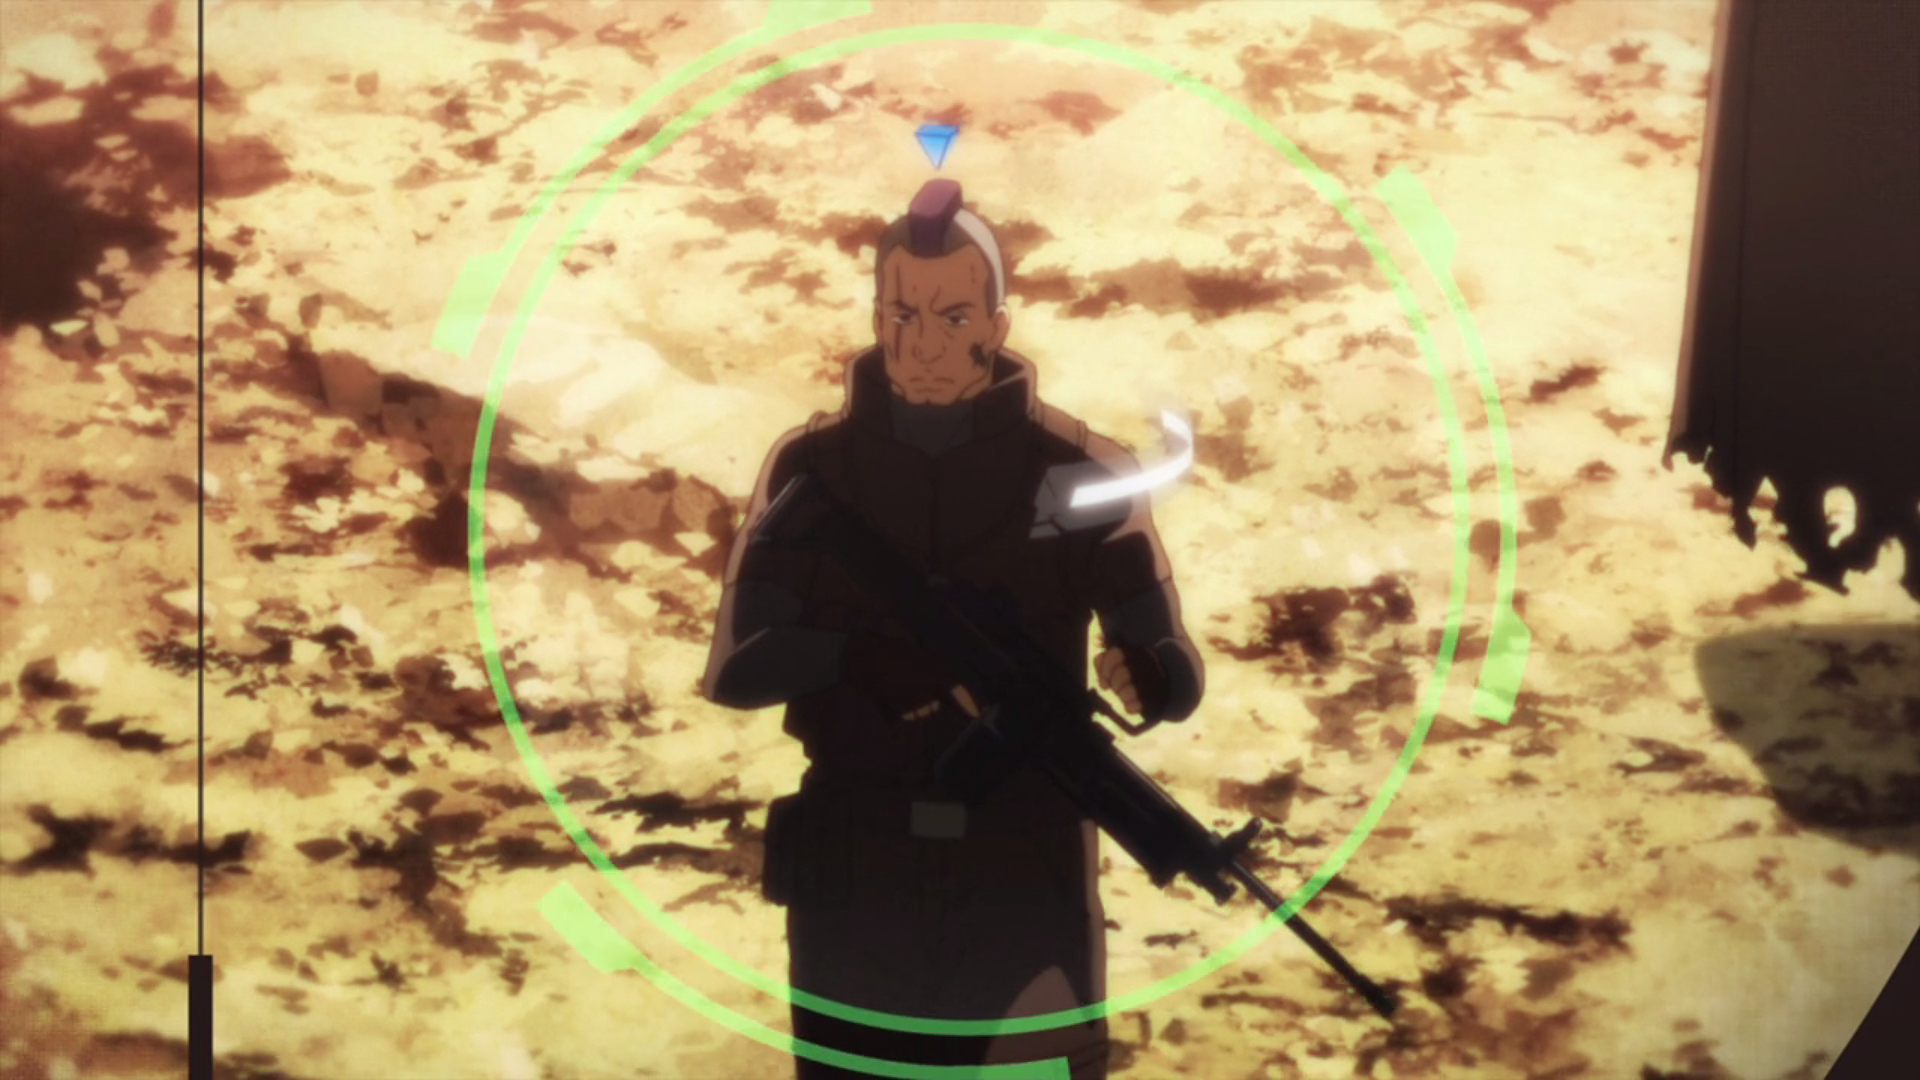 Sword Art Online II, Episode 1: Mission Impossible – Beneath the Tangles